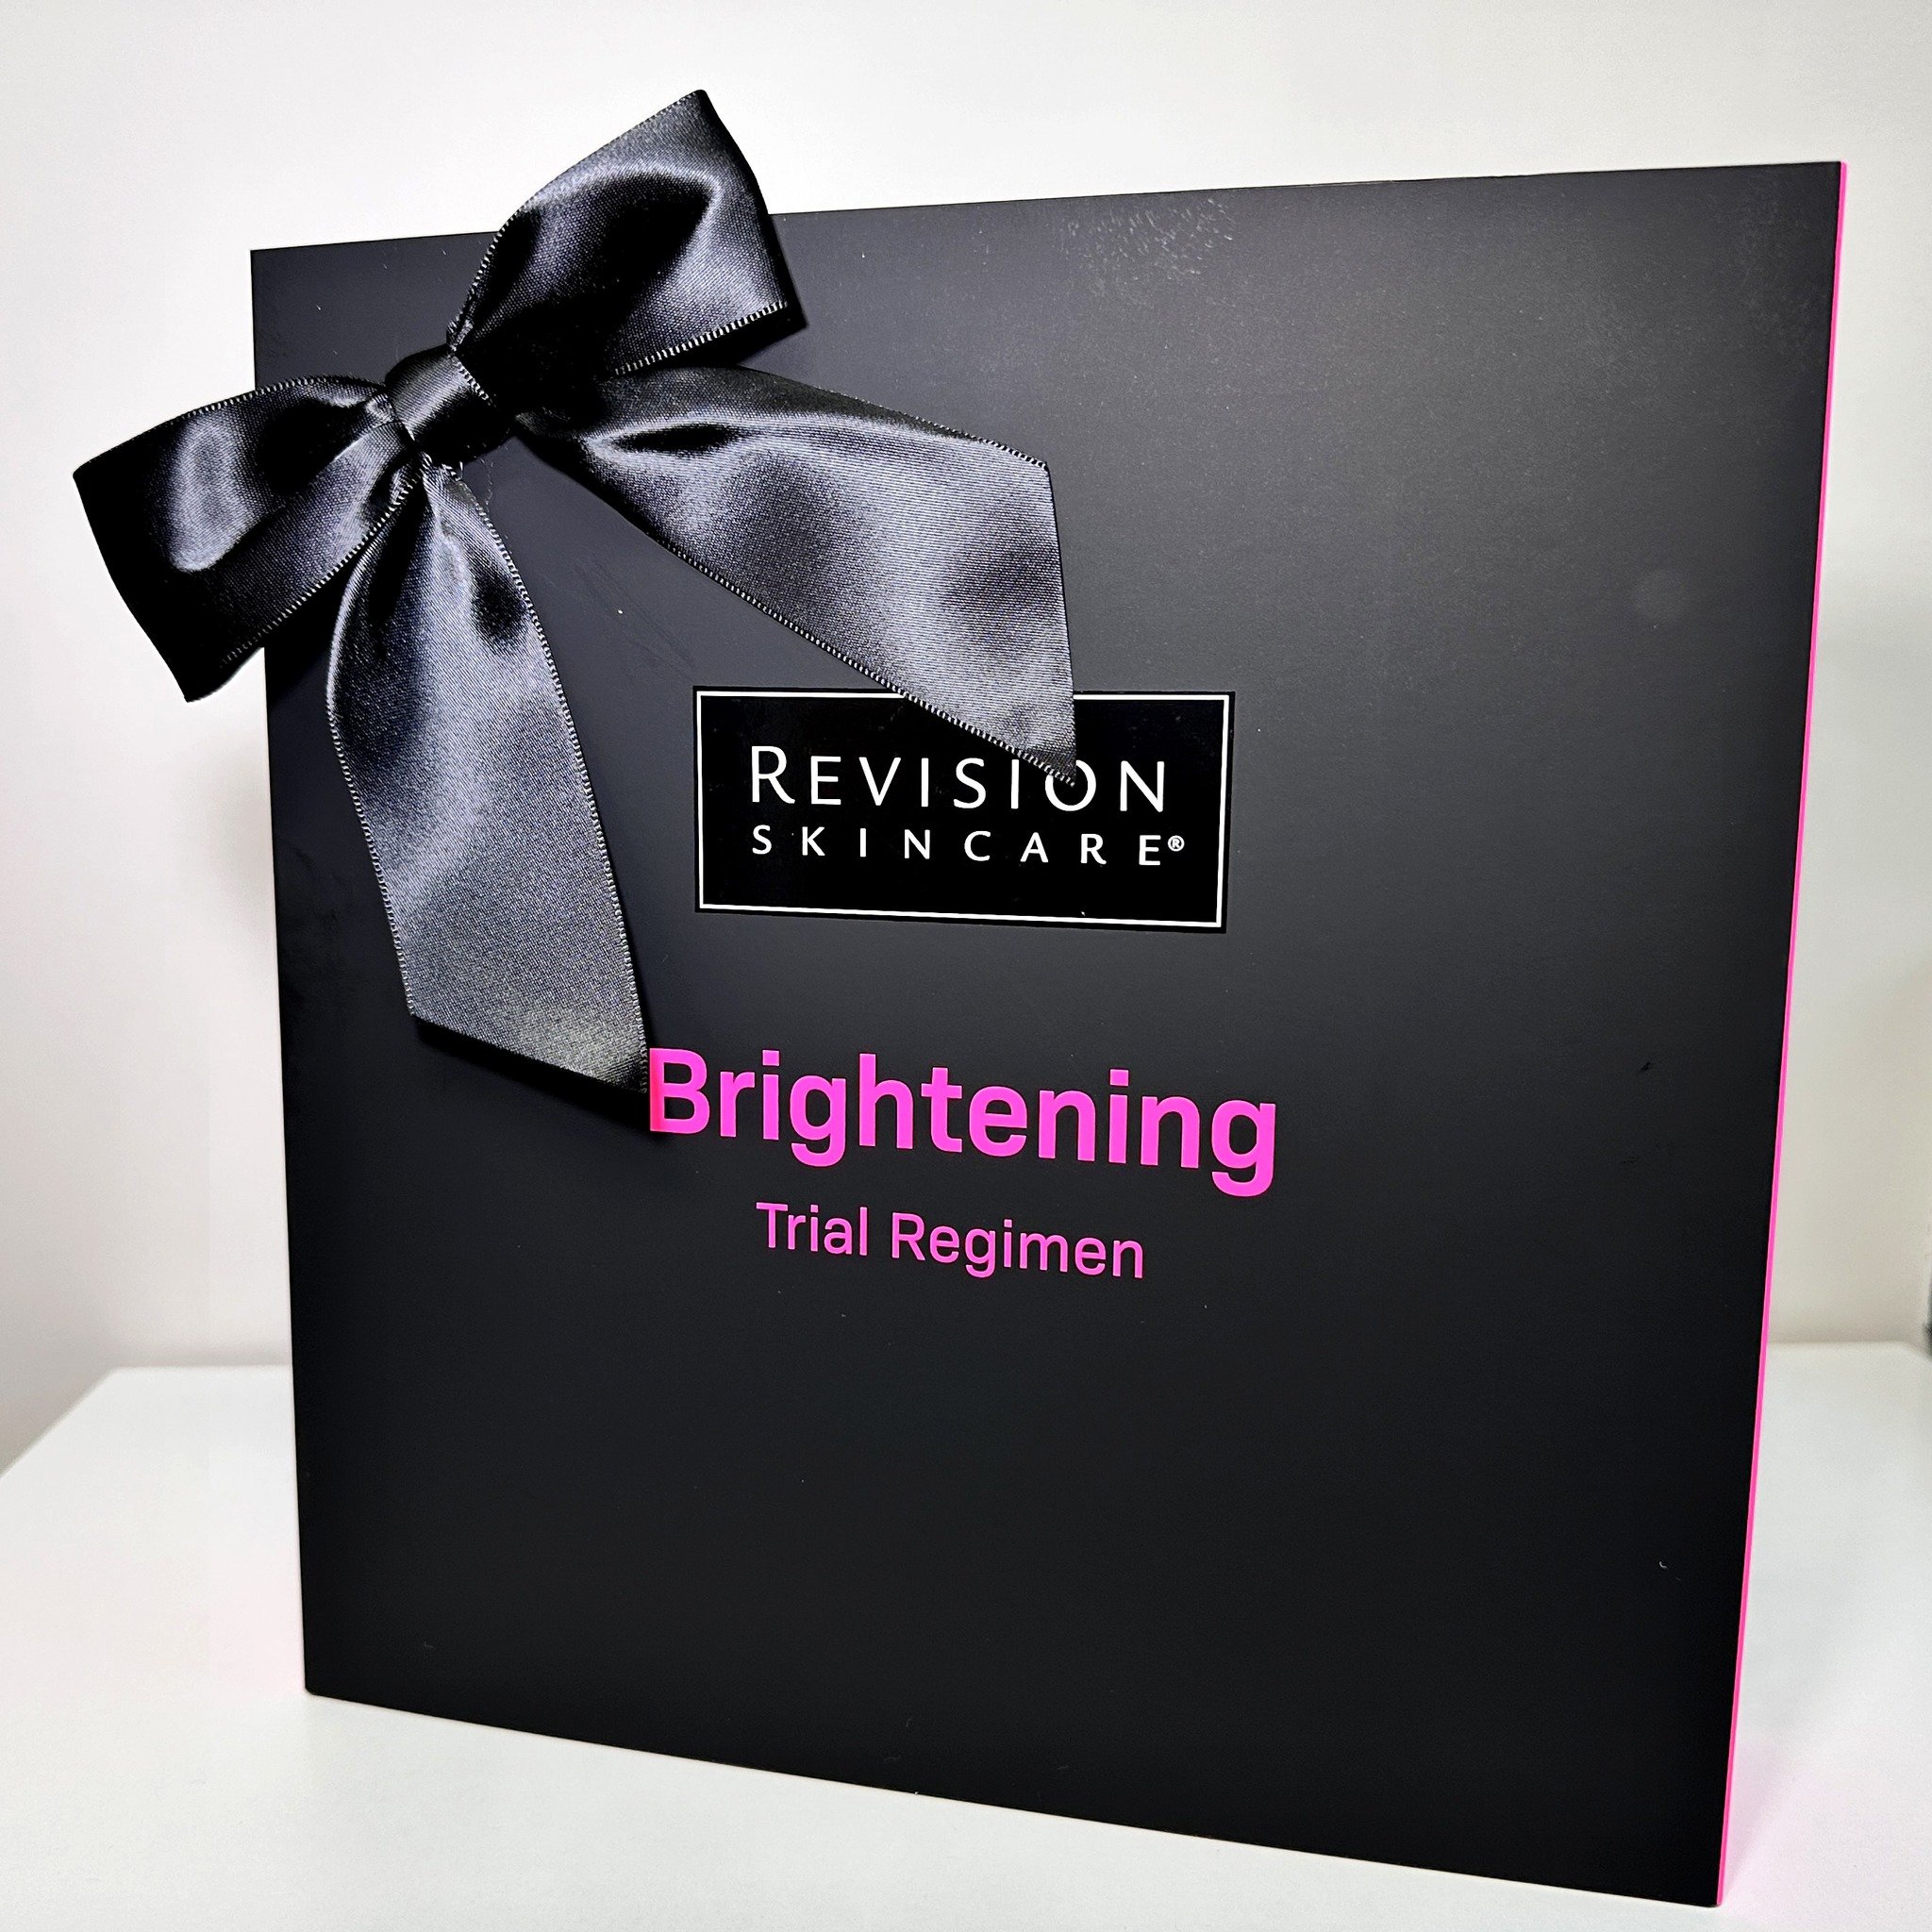 Recapture your youthful radiance with a results-driven regimen of @revisionskincare products that work together to brighten and even skin tone from face to d&eacute;colletage. Available in our office!

#RevisionSkincare #BrighterSkin #BrighteningRegi